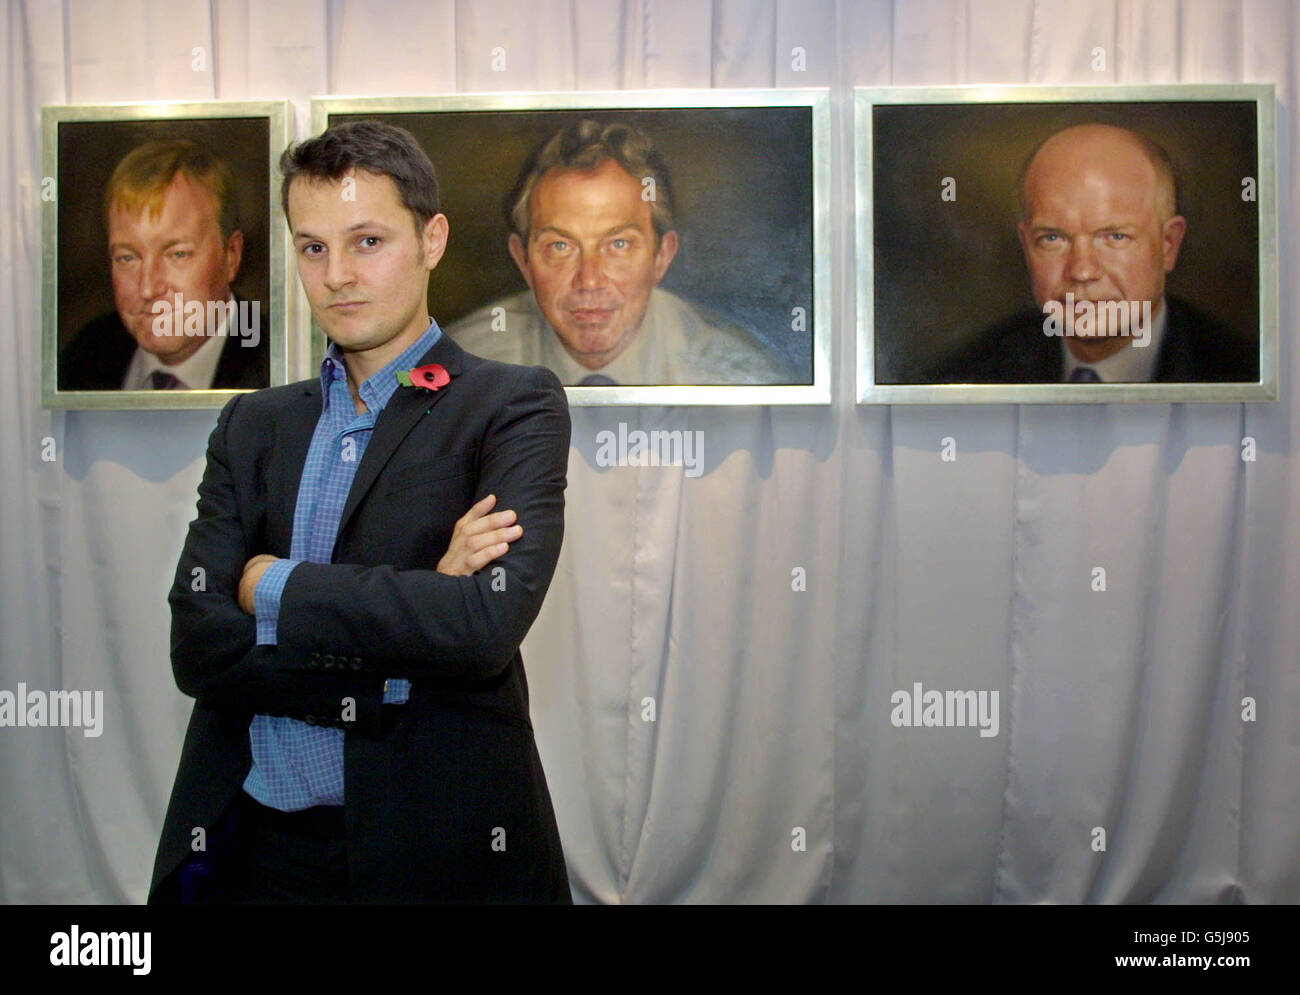 Artist Jonathan Yeo stands in front of his political portraits (from left) of Lib Dem party leader Charles Kennedy, British Prime Minister Tony Blair, and former Conservative Party leader William Hague, at Portcullis House in London. * Mr Yeo, the son of shadow culture secretary Tim Yeo, was commissioned by the Commons Works of Art Committee to capture the party leaders 'at their most pressurised' in his triptych, which he called 'Proportional Representation'. Stock Photo